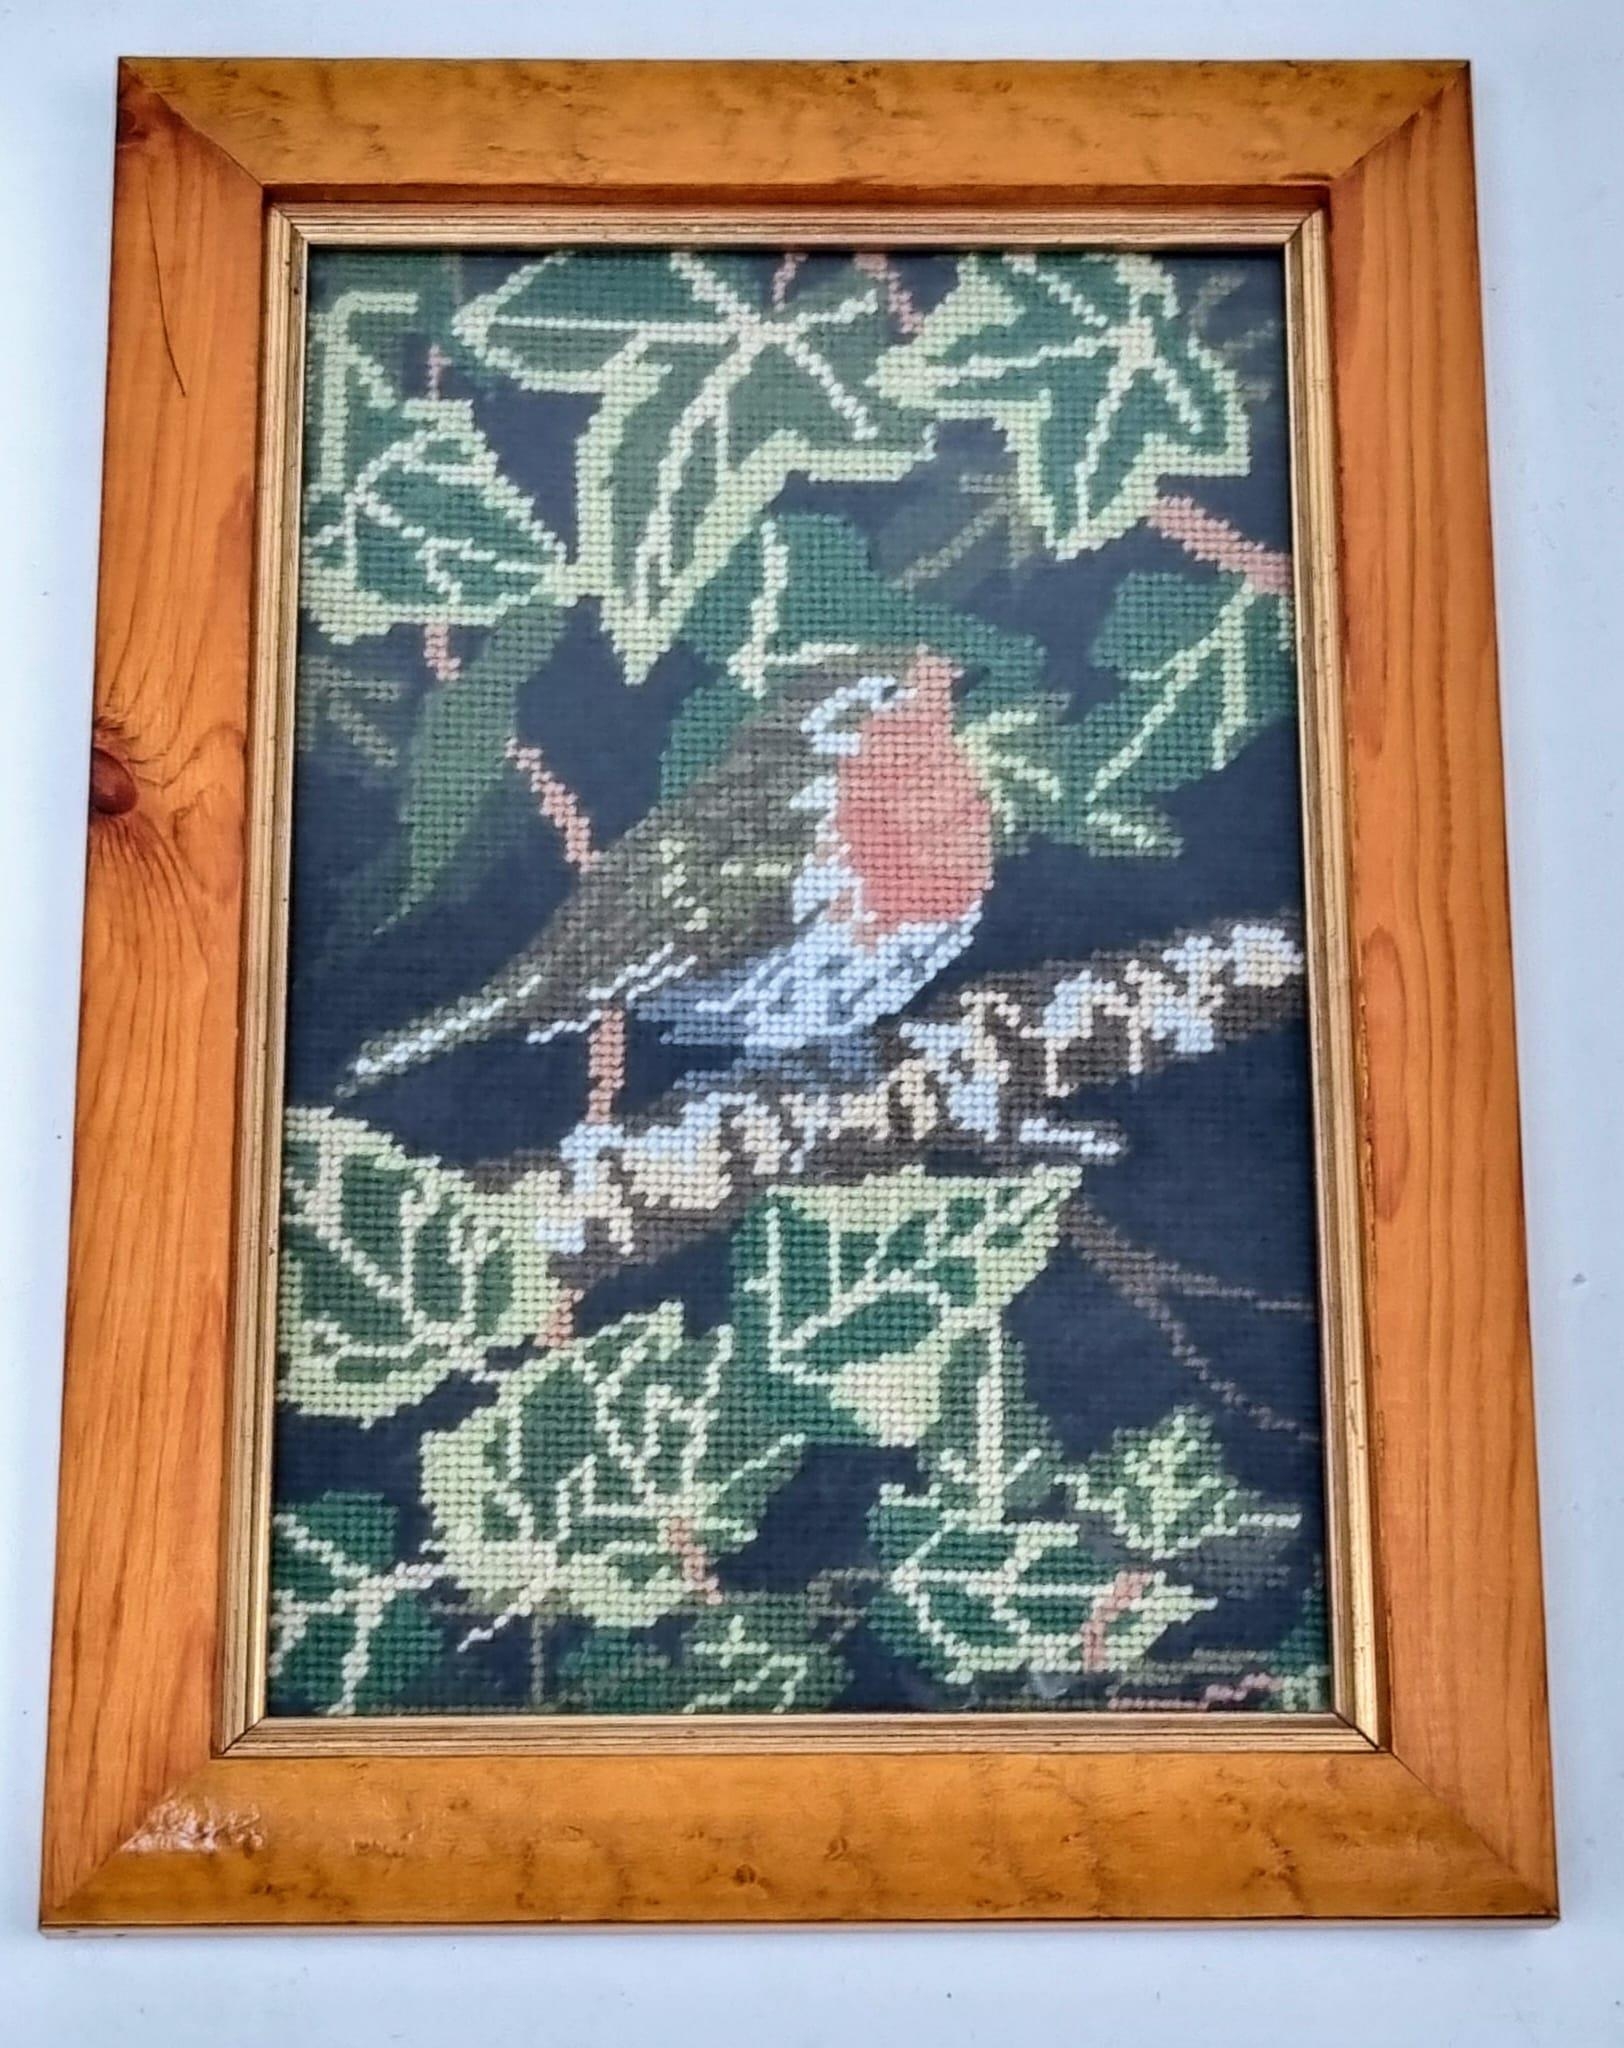 Three Well-Crafted Woven Fabric Artworks. Two Avian inspired and one floral. In frame, largest piece - Image 5 of 7